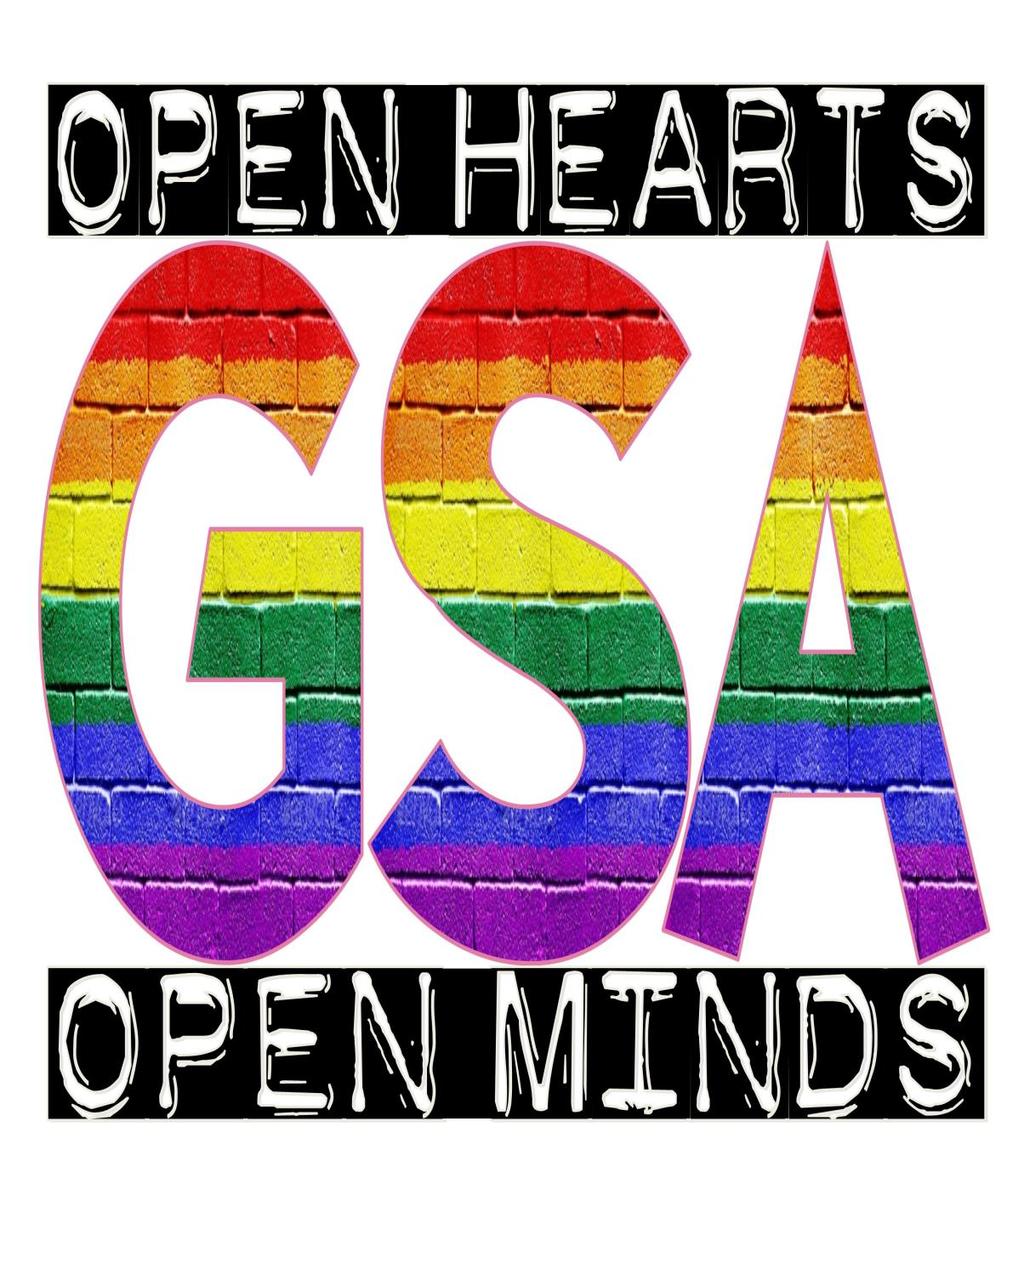 GSA will have a meeting on Thursday, February 14 2:15pm